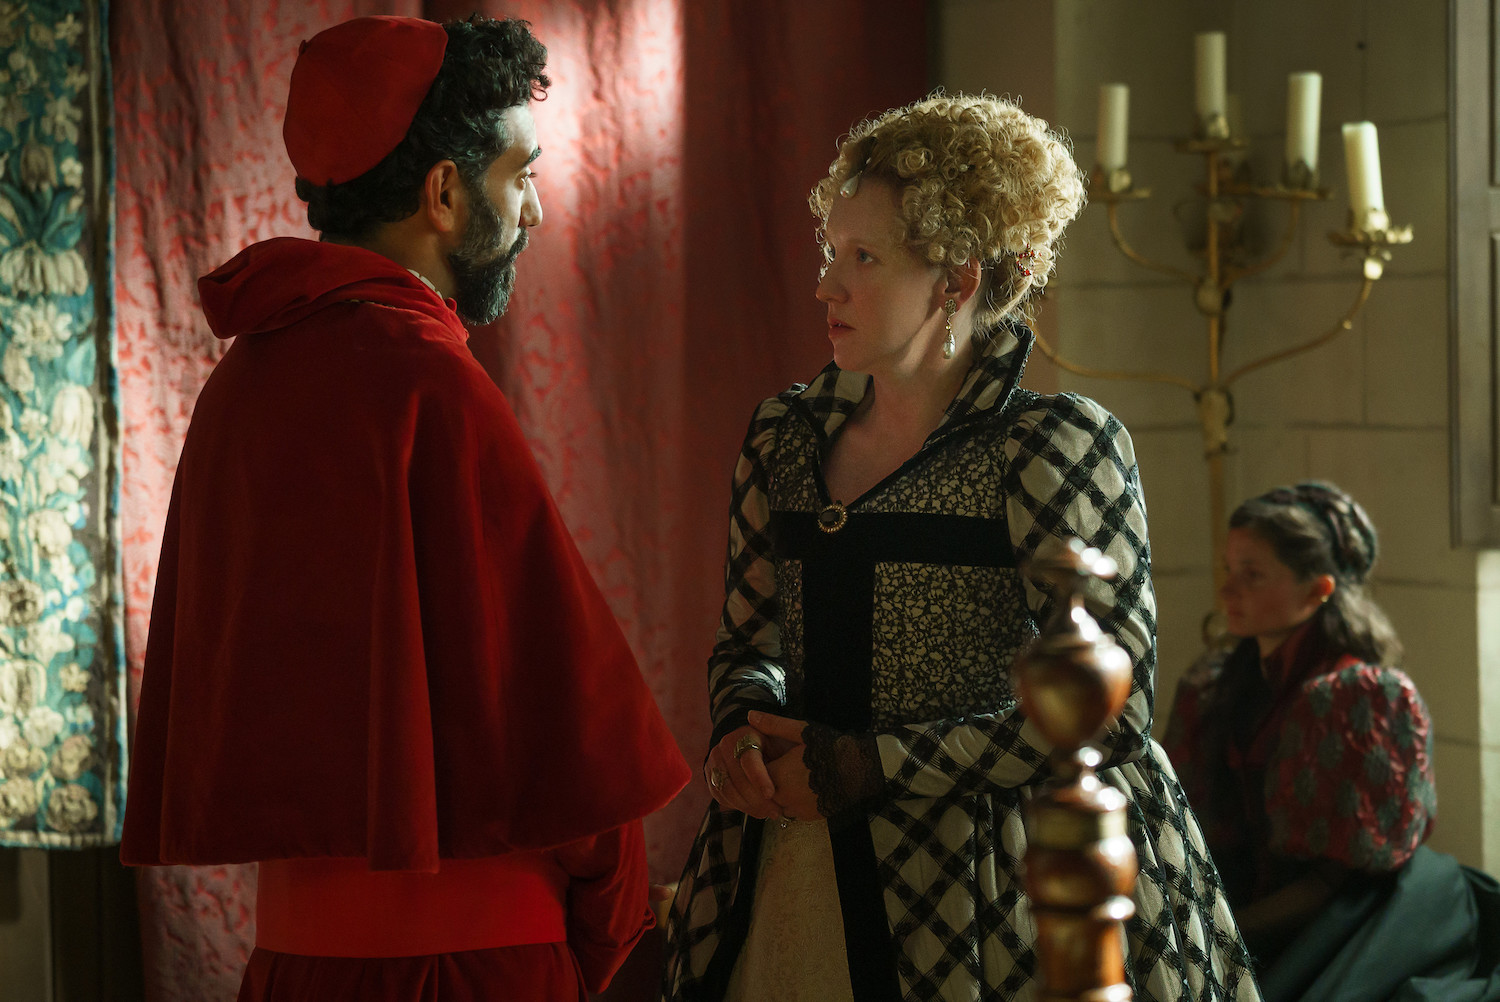 Picture shows: Cardinal Charles de Guise (Ray Panthaki) negotiates with Diane de Poitiers (Ludivine Sagnier), while Angelica (Ruby Bentall) looks on.